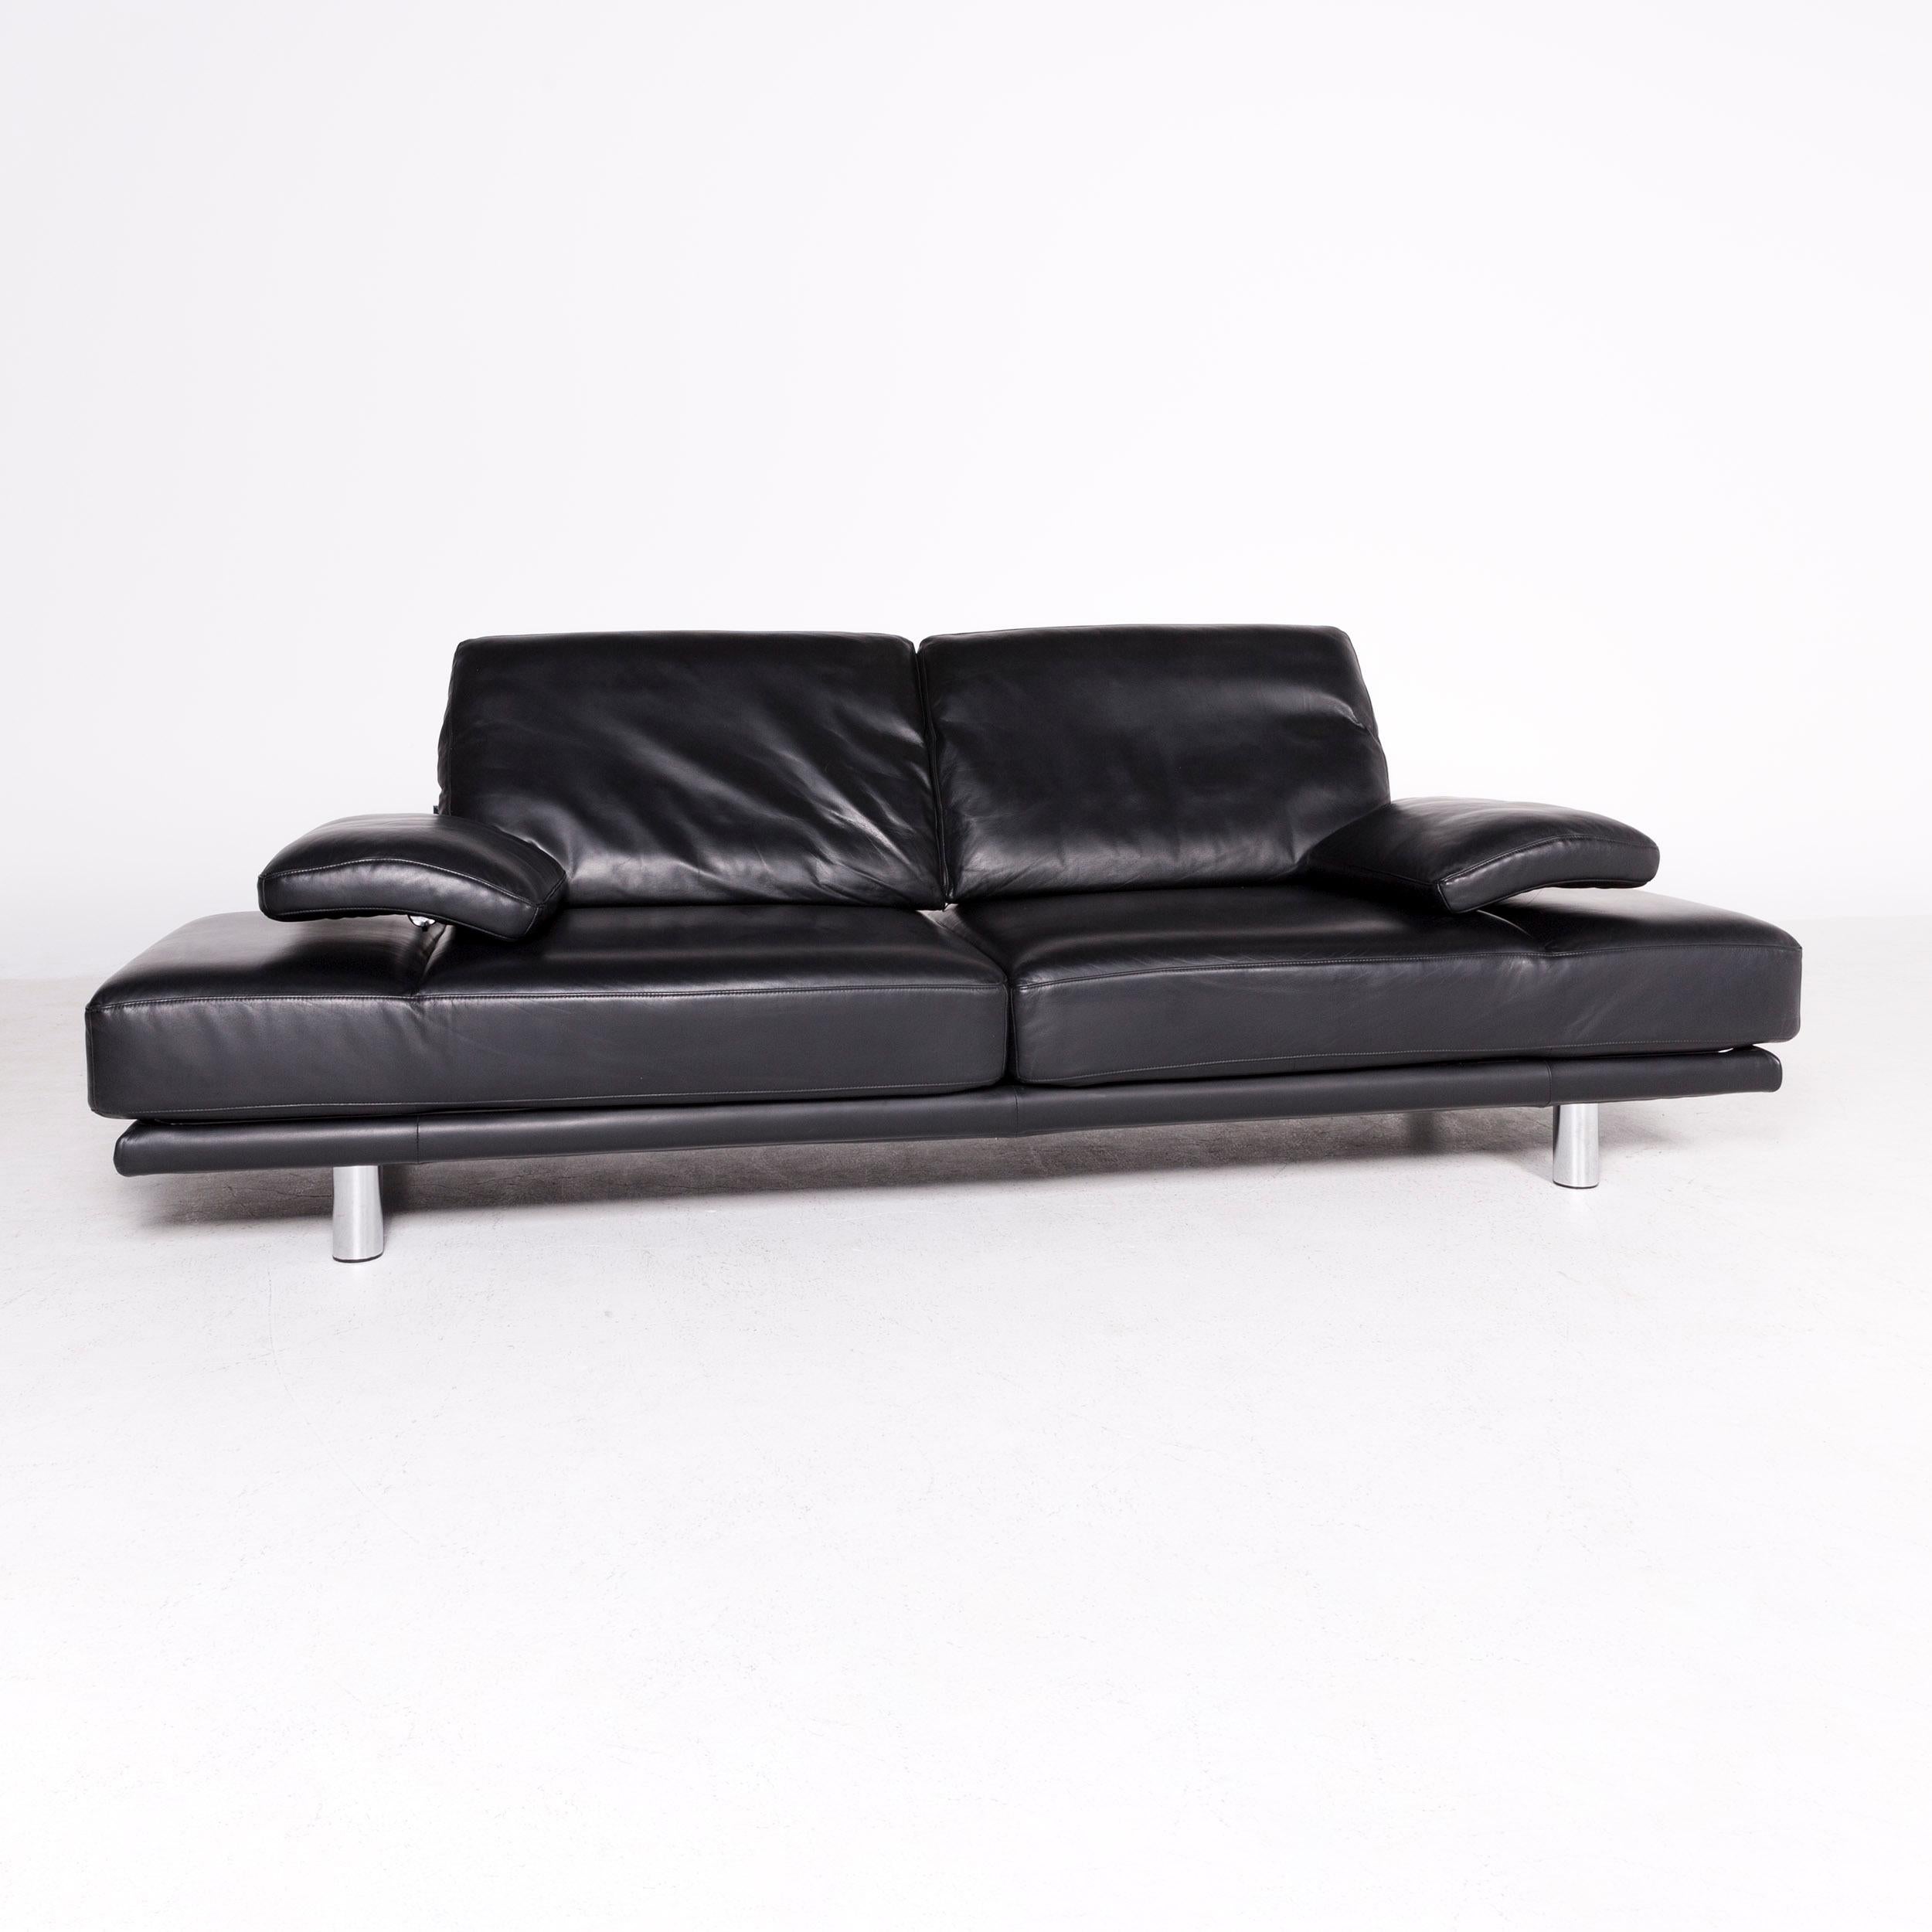 Modern Rolf Benz 2400 Designer Leather Sofa Black Genuine Leather Three-Seat Couch For Sale